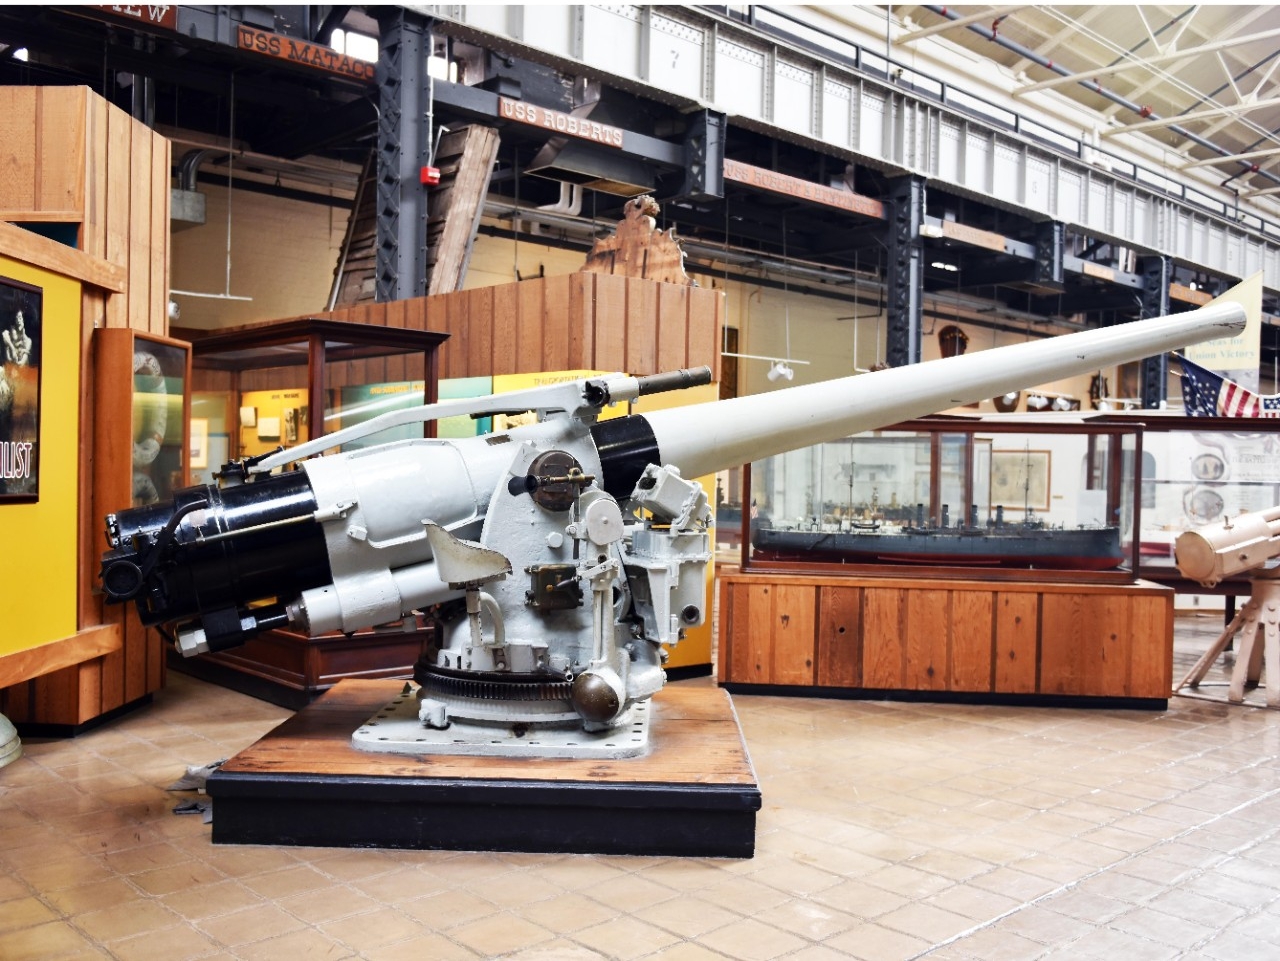 5"/51 Caliber Gun as it looked while on display in the World War I section of the National Museum of the U.S. Navy, Washington Navy Yard, Washington, D.C.